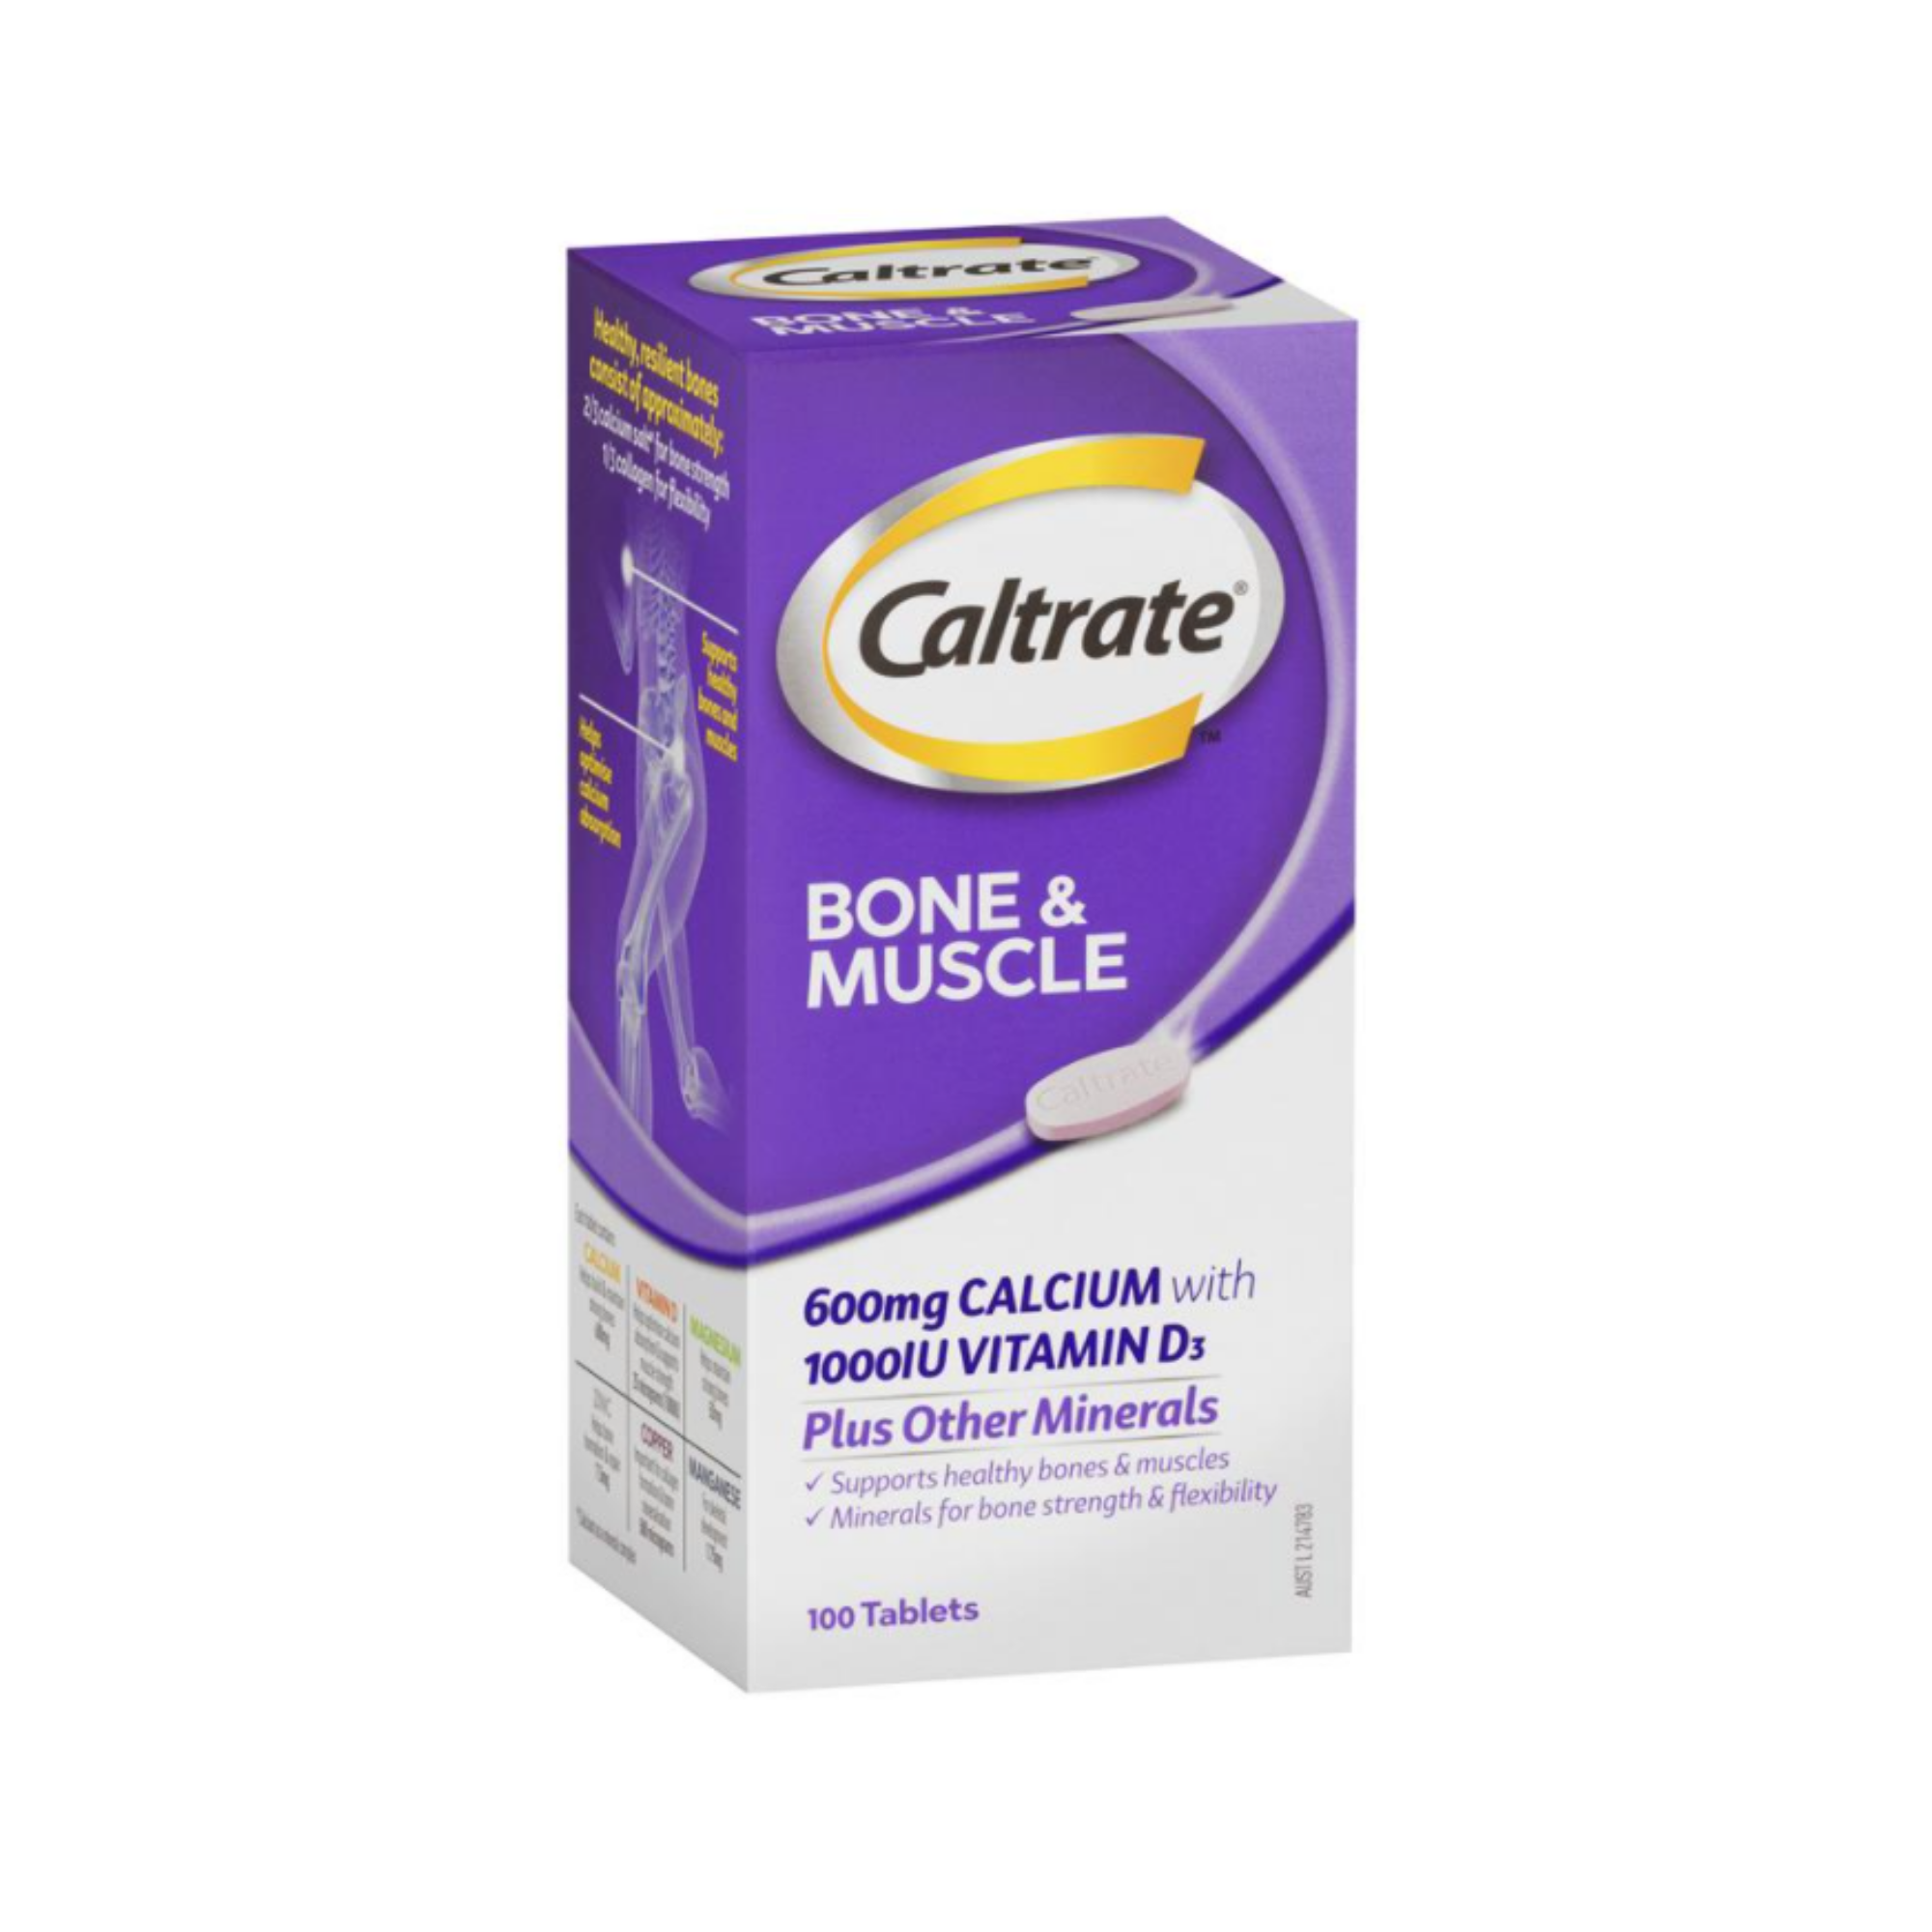 Caltrate Bone and Muscle 100 Tablets